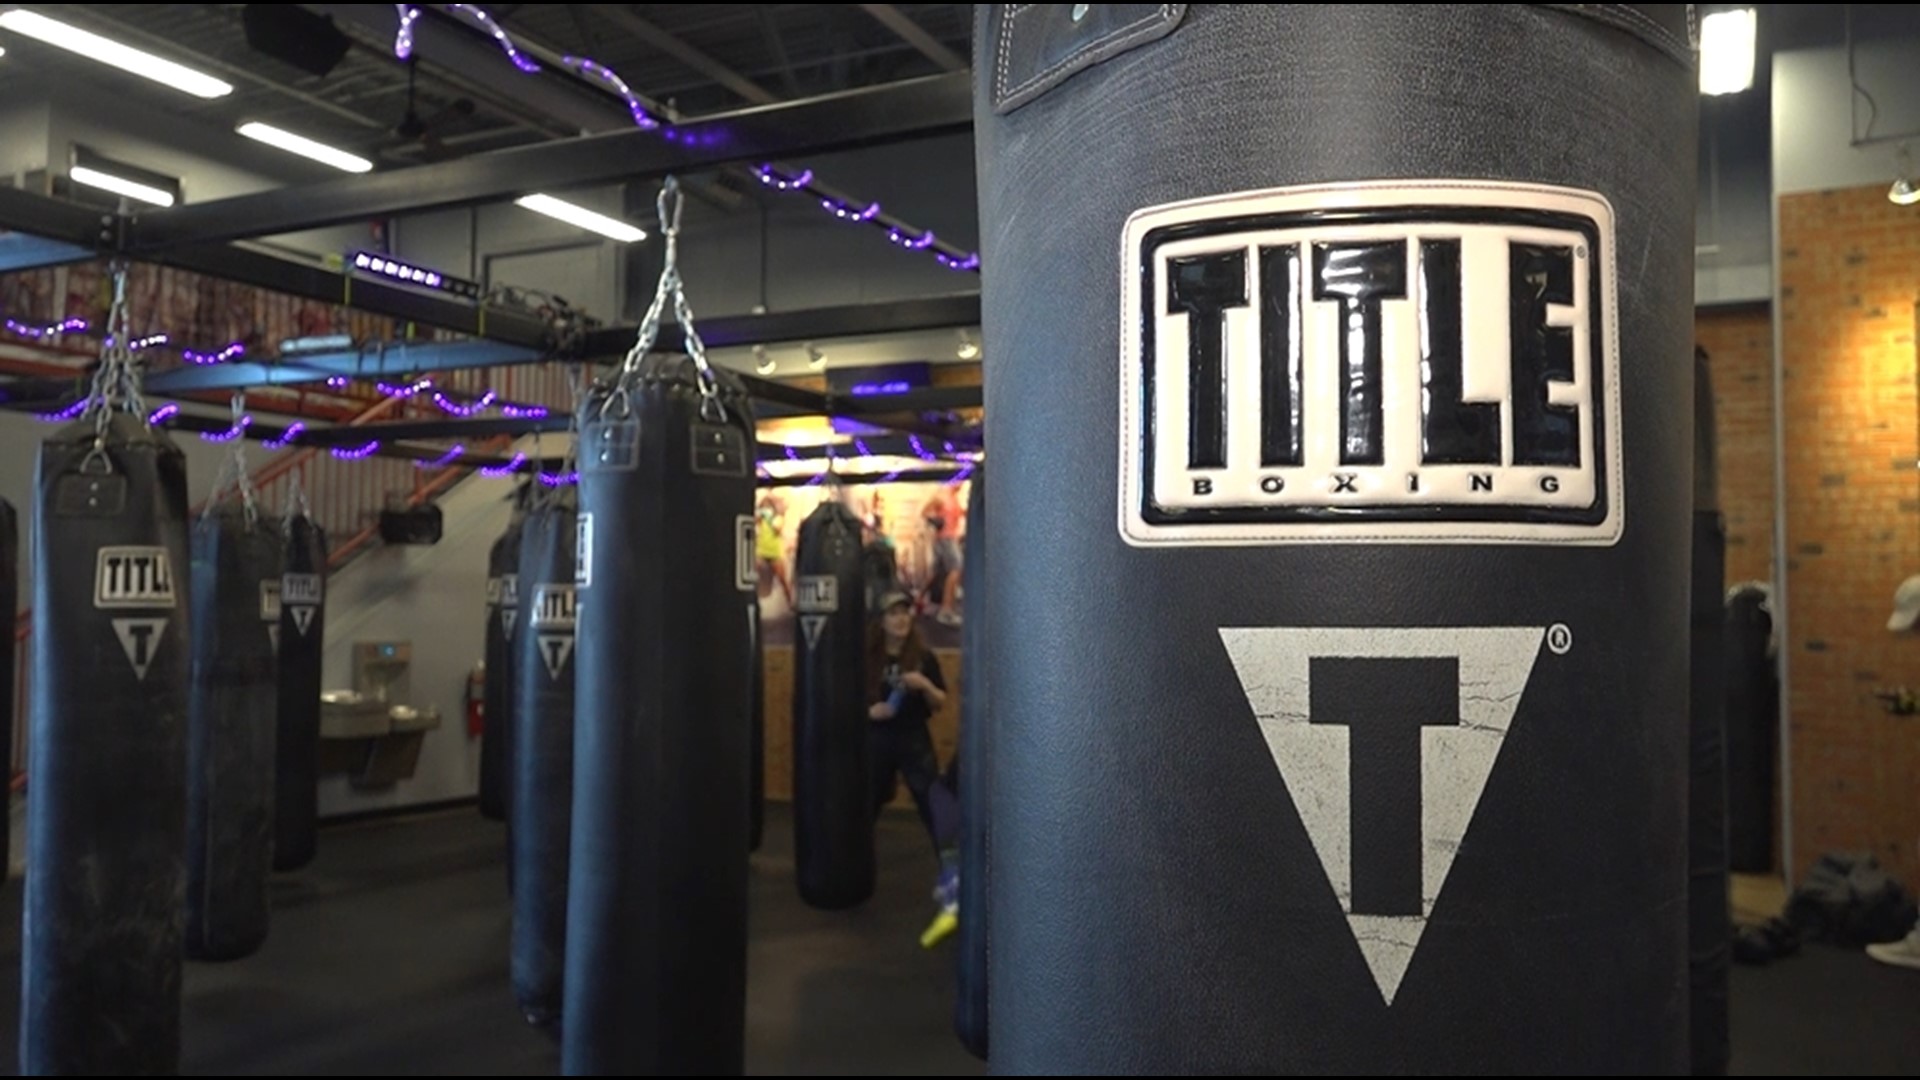 Become a part of the family, and tap into your inner strength through Title Boxing Club in Camp Hill's boxing classes!